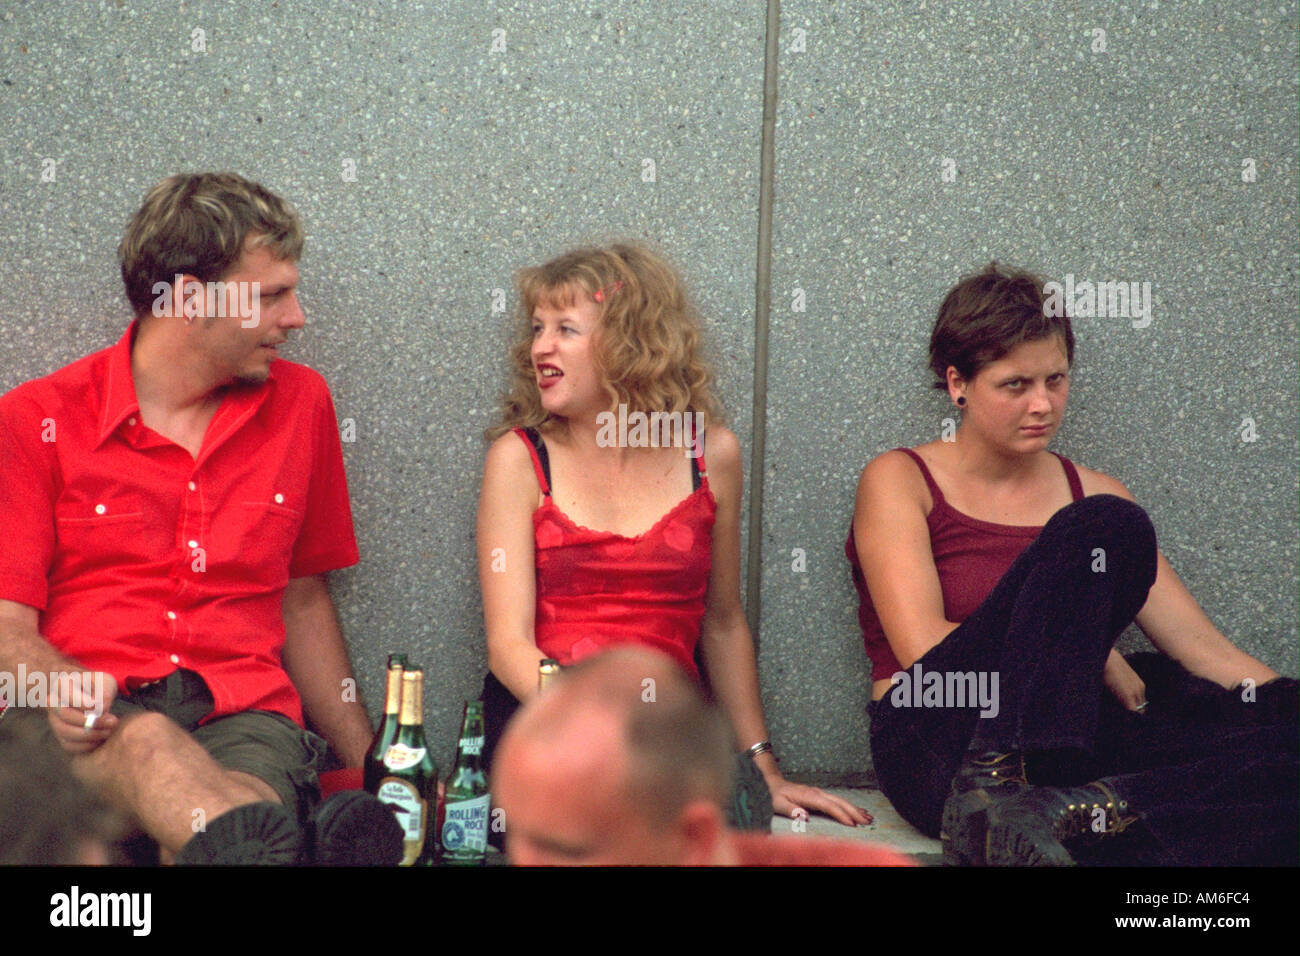 Friends age 24 smoking drinking and talking at Bastille Day Festival. Minneapolis Minnesota USA Stock Photo